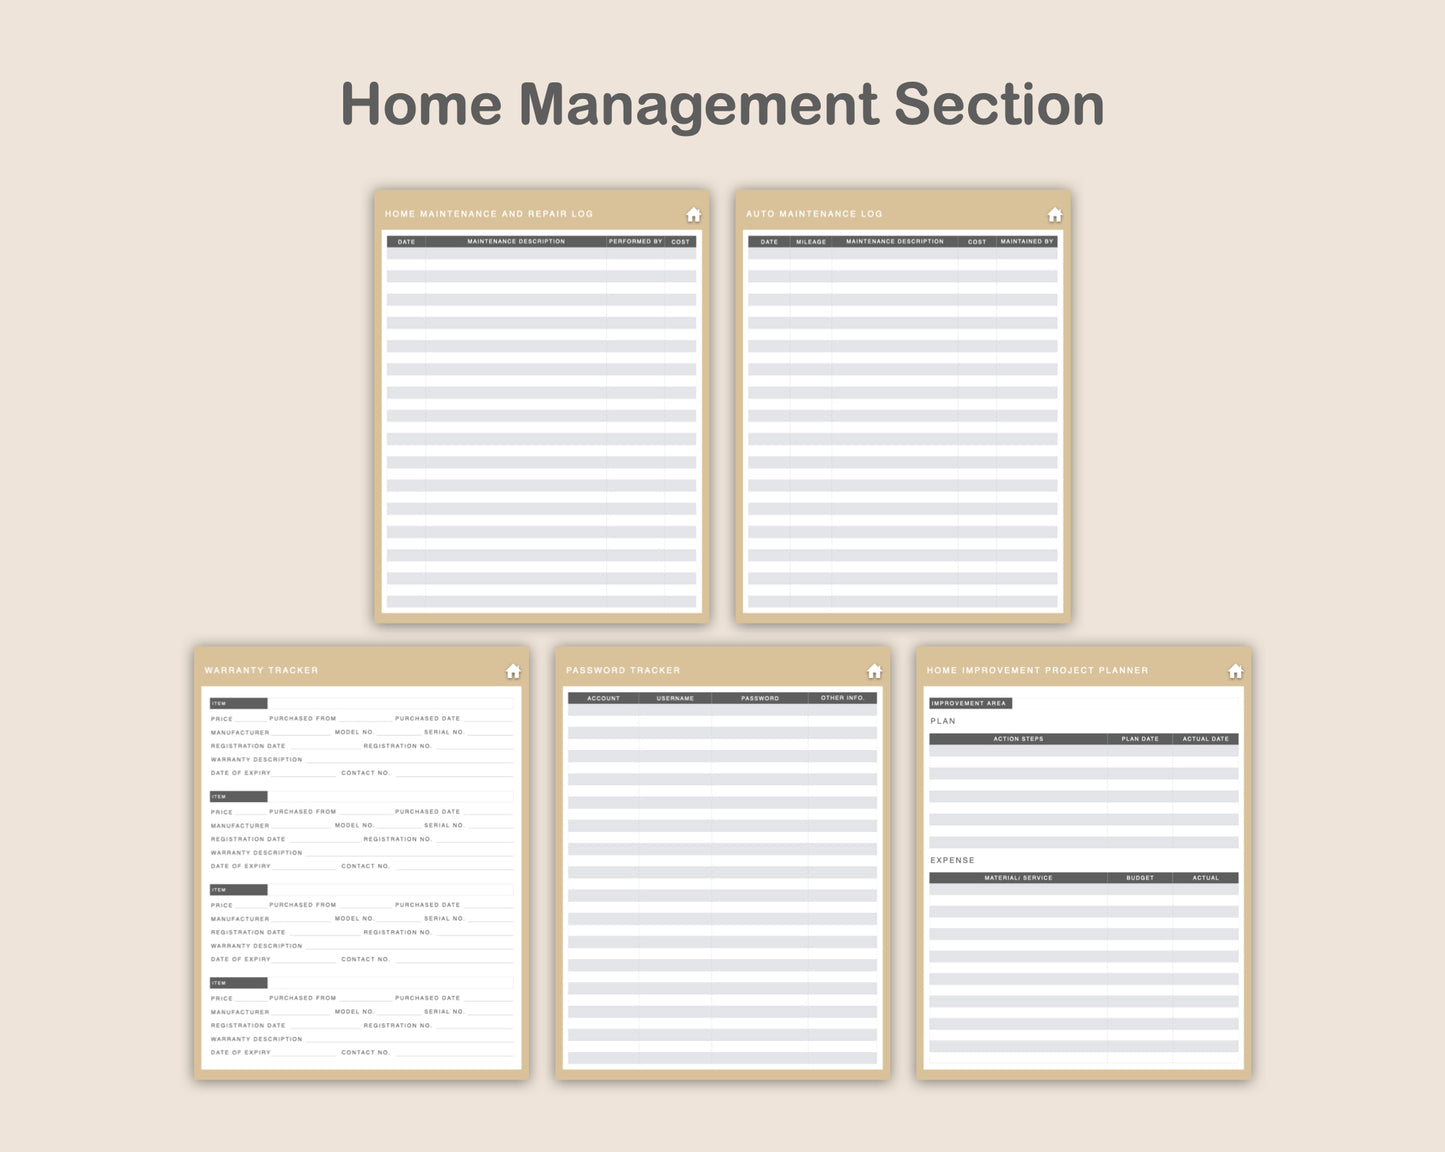 Digital Home Planner - Muted